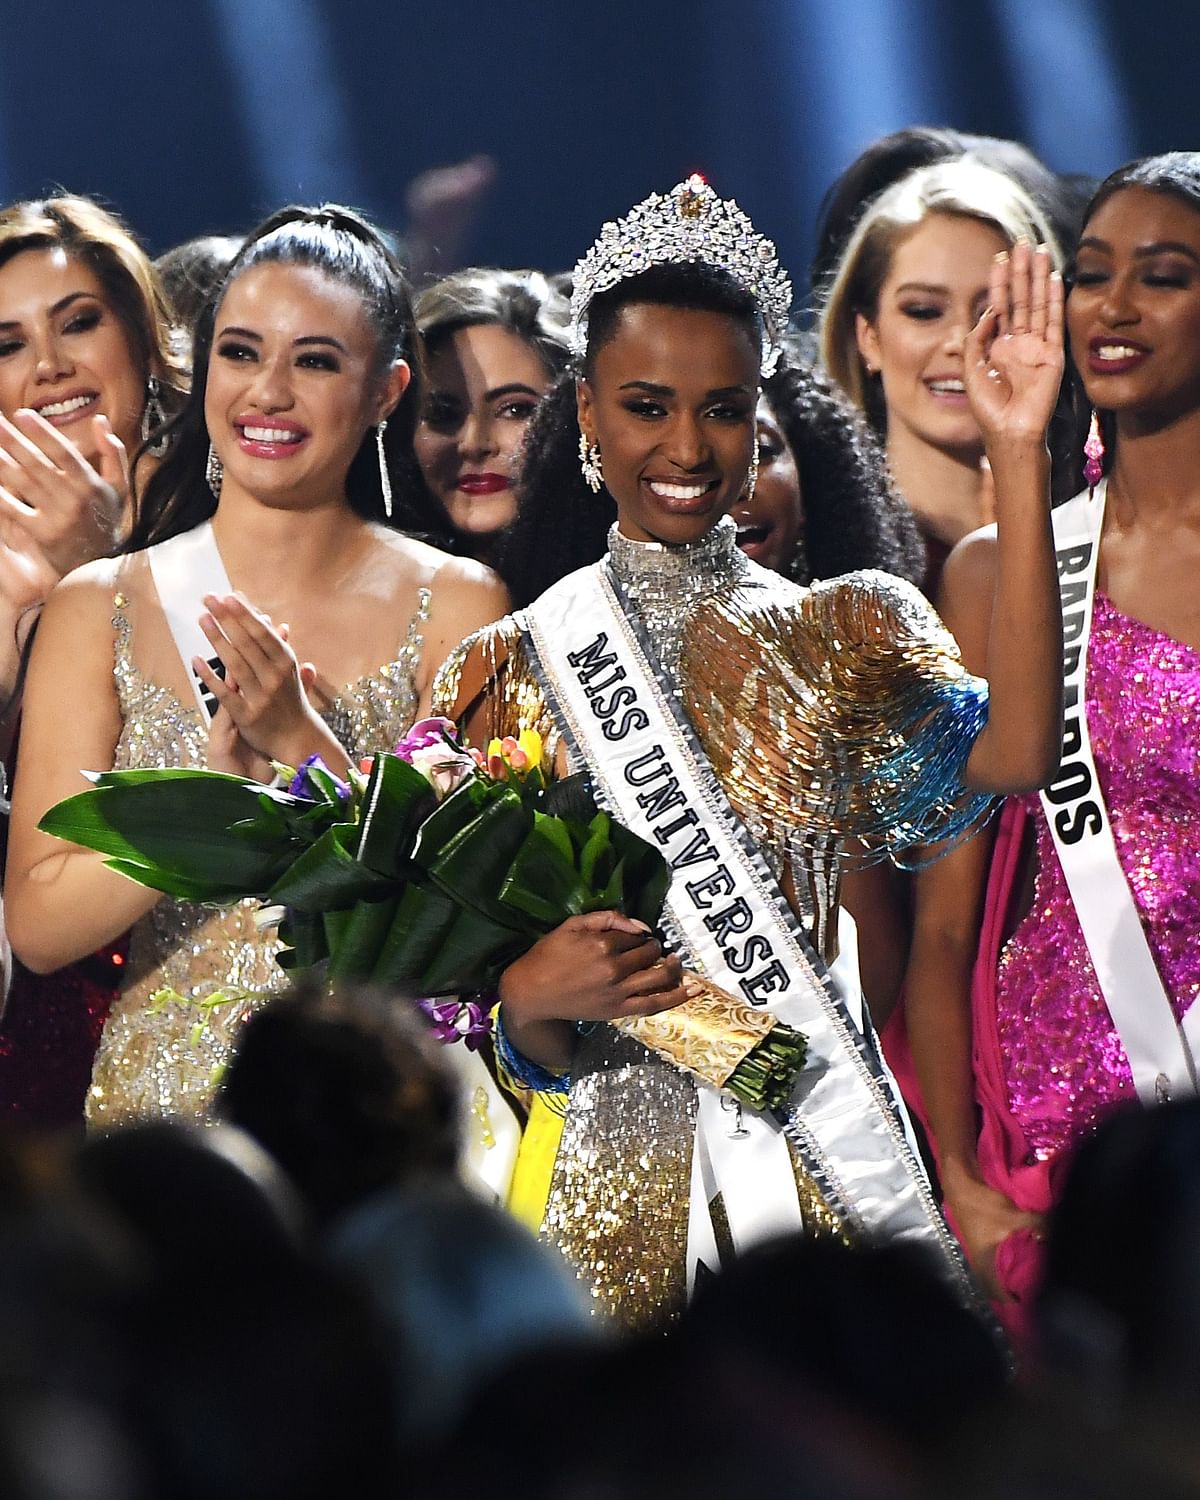 Miss Universe 2019 Zozibini Tunzi, of South Africa, is crowned onstage at the 2019 Miss Universe Pageant at Tyler Perry Studios on 08 December in Atlanta, Georgia. Photo: AFP